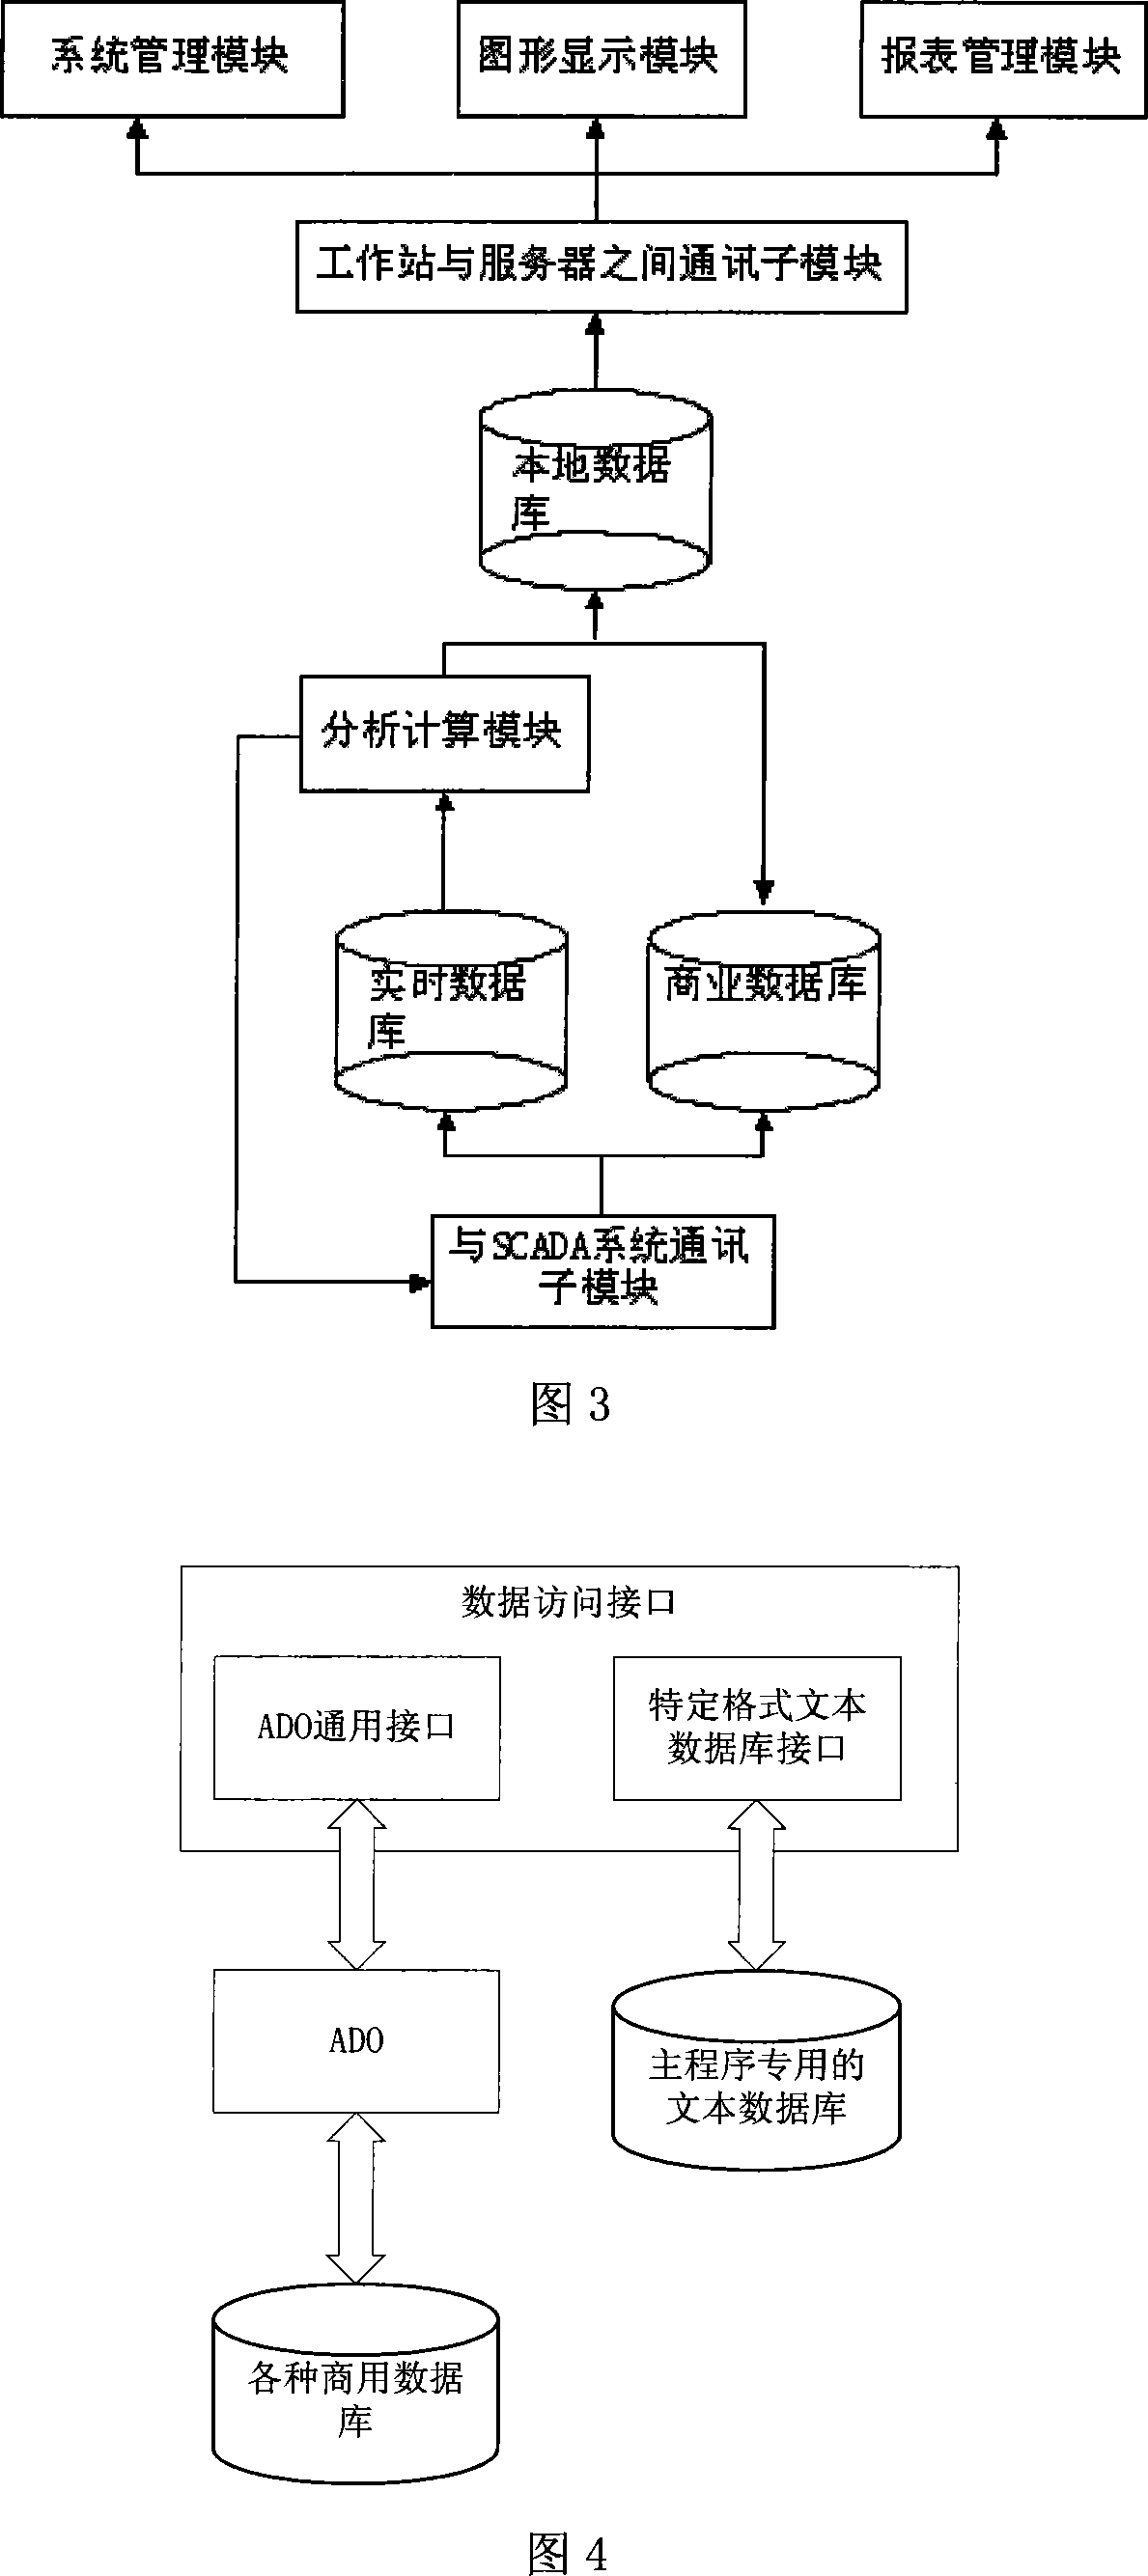 Powerless voltage automatic control system for area power grid